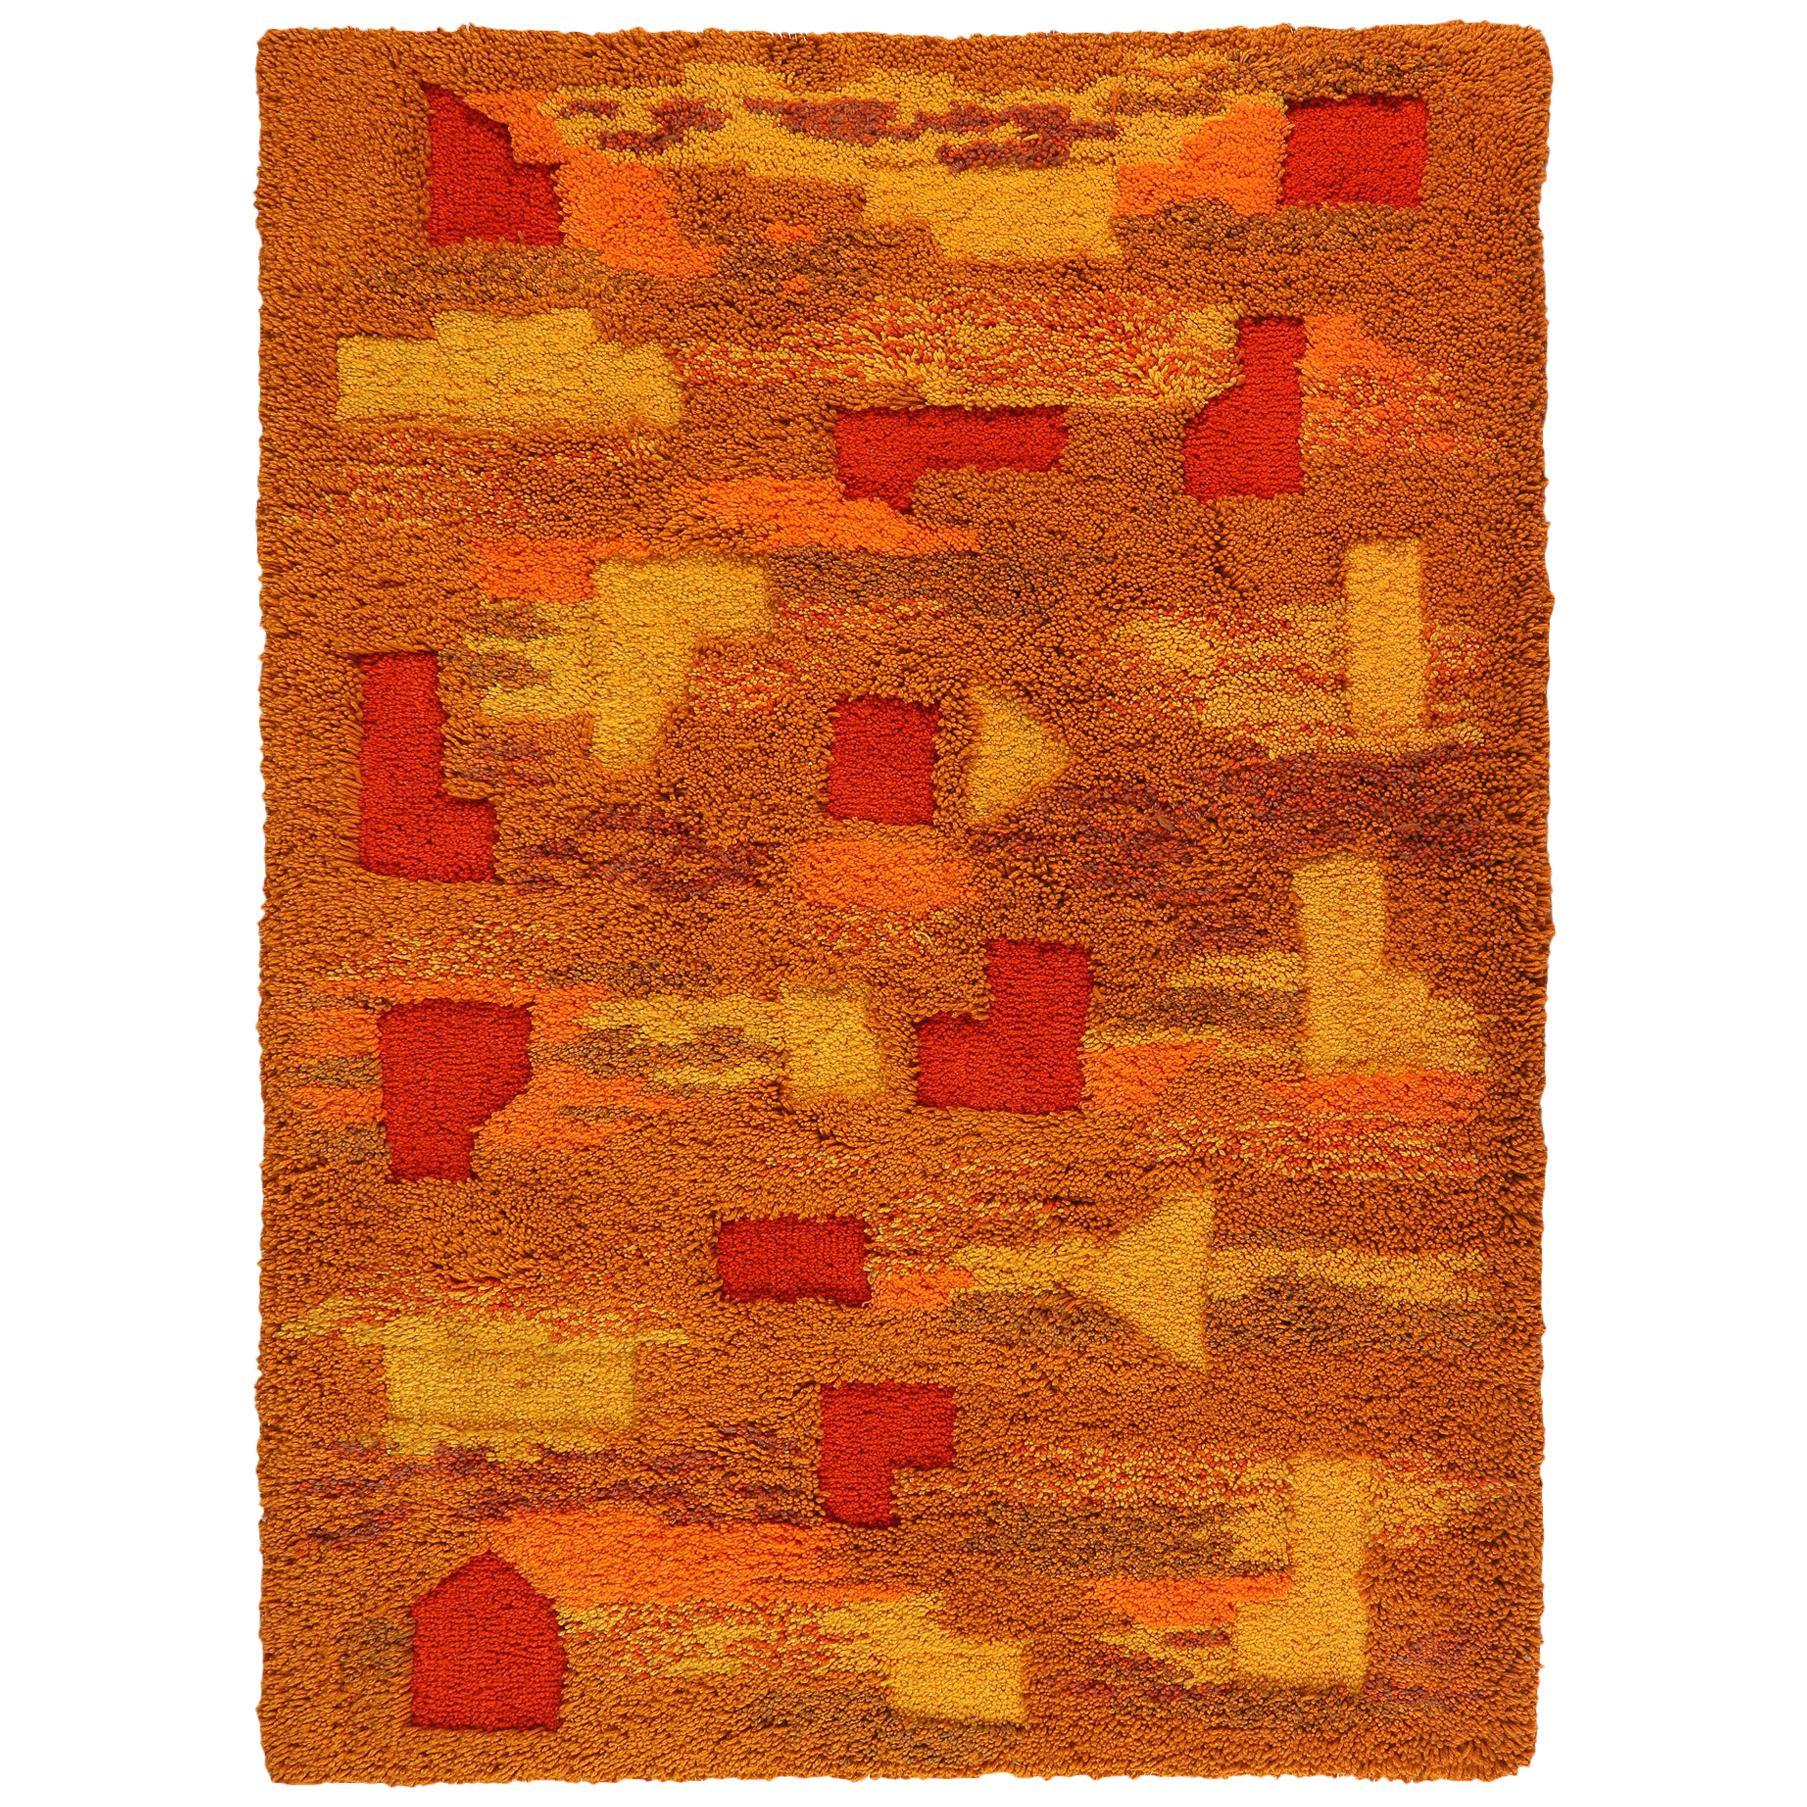 Orange and Yellow Op Pop Mod Woven Tapestry or Rug For Sale